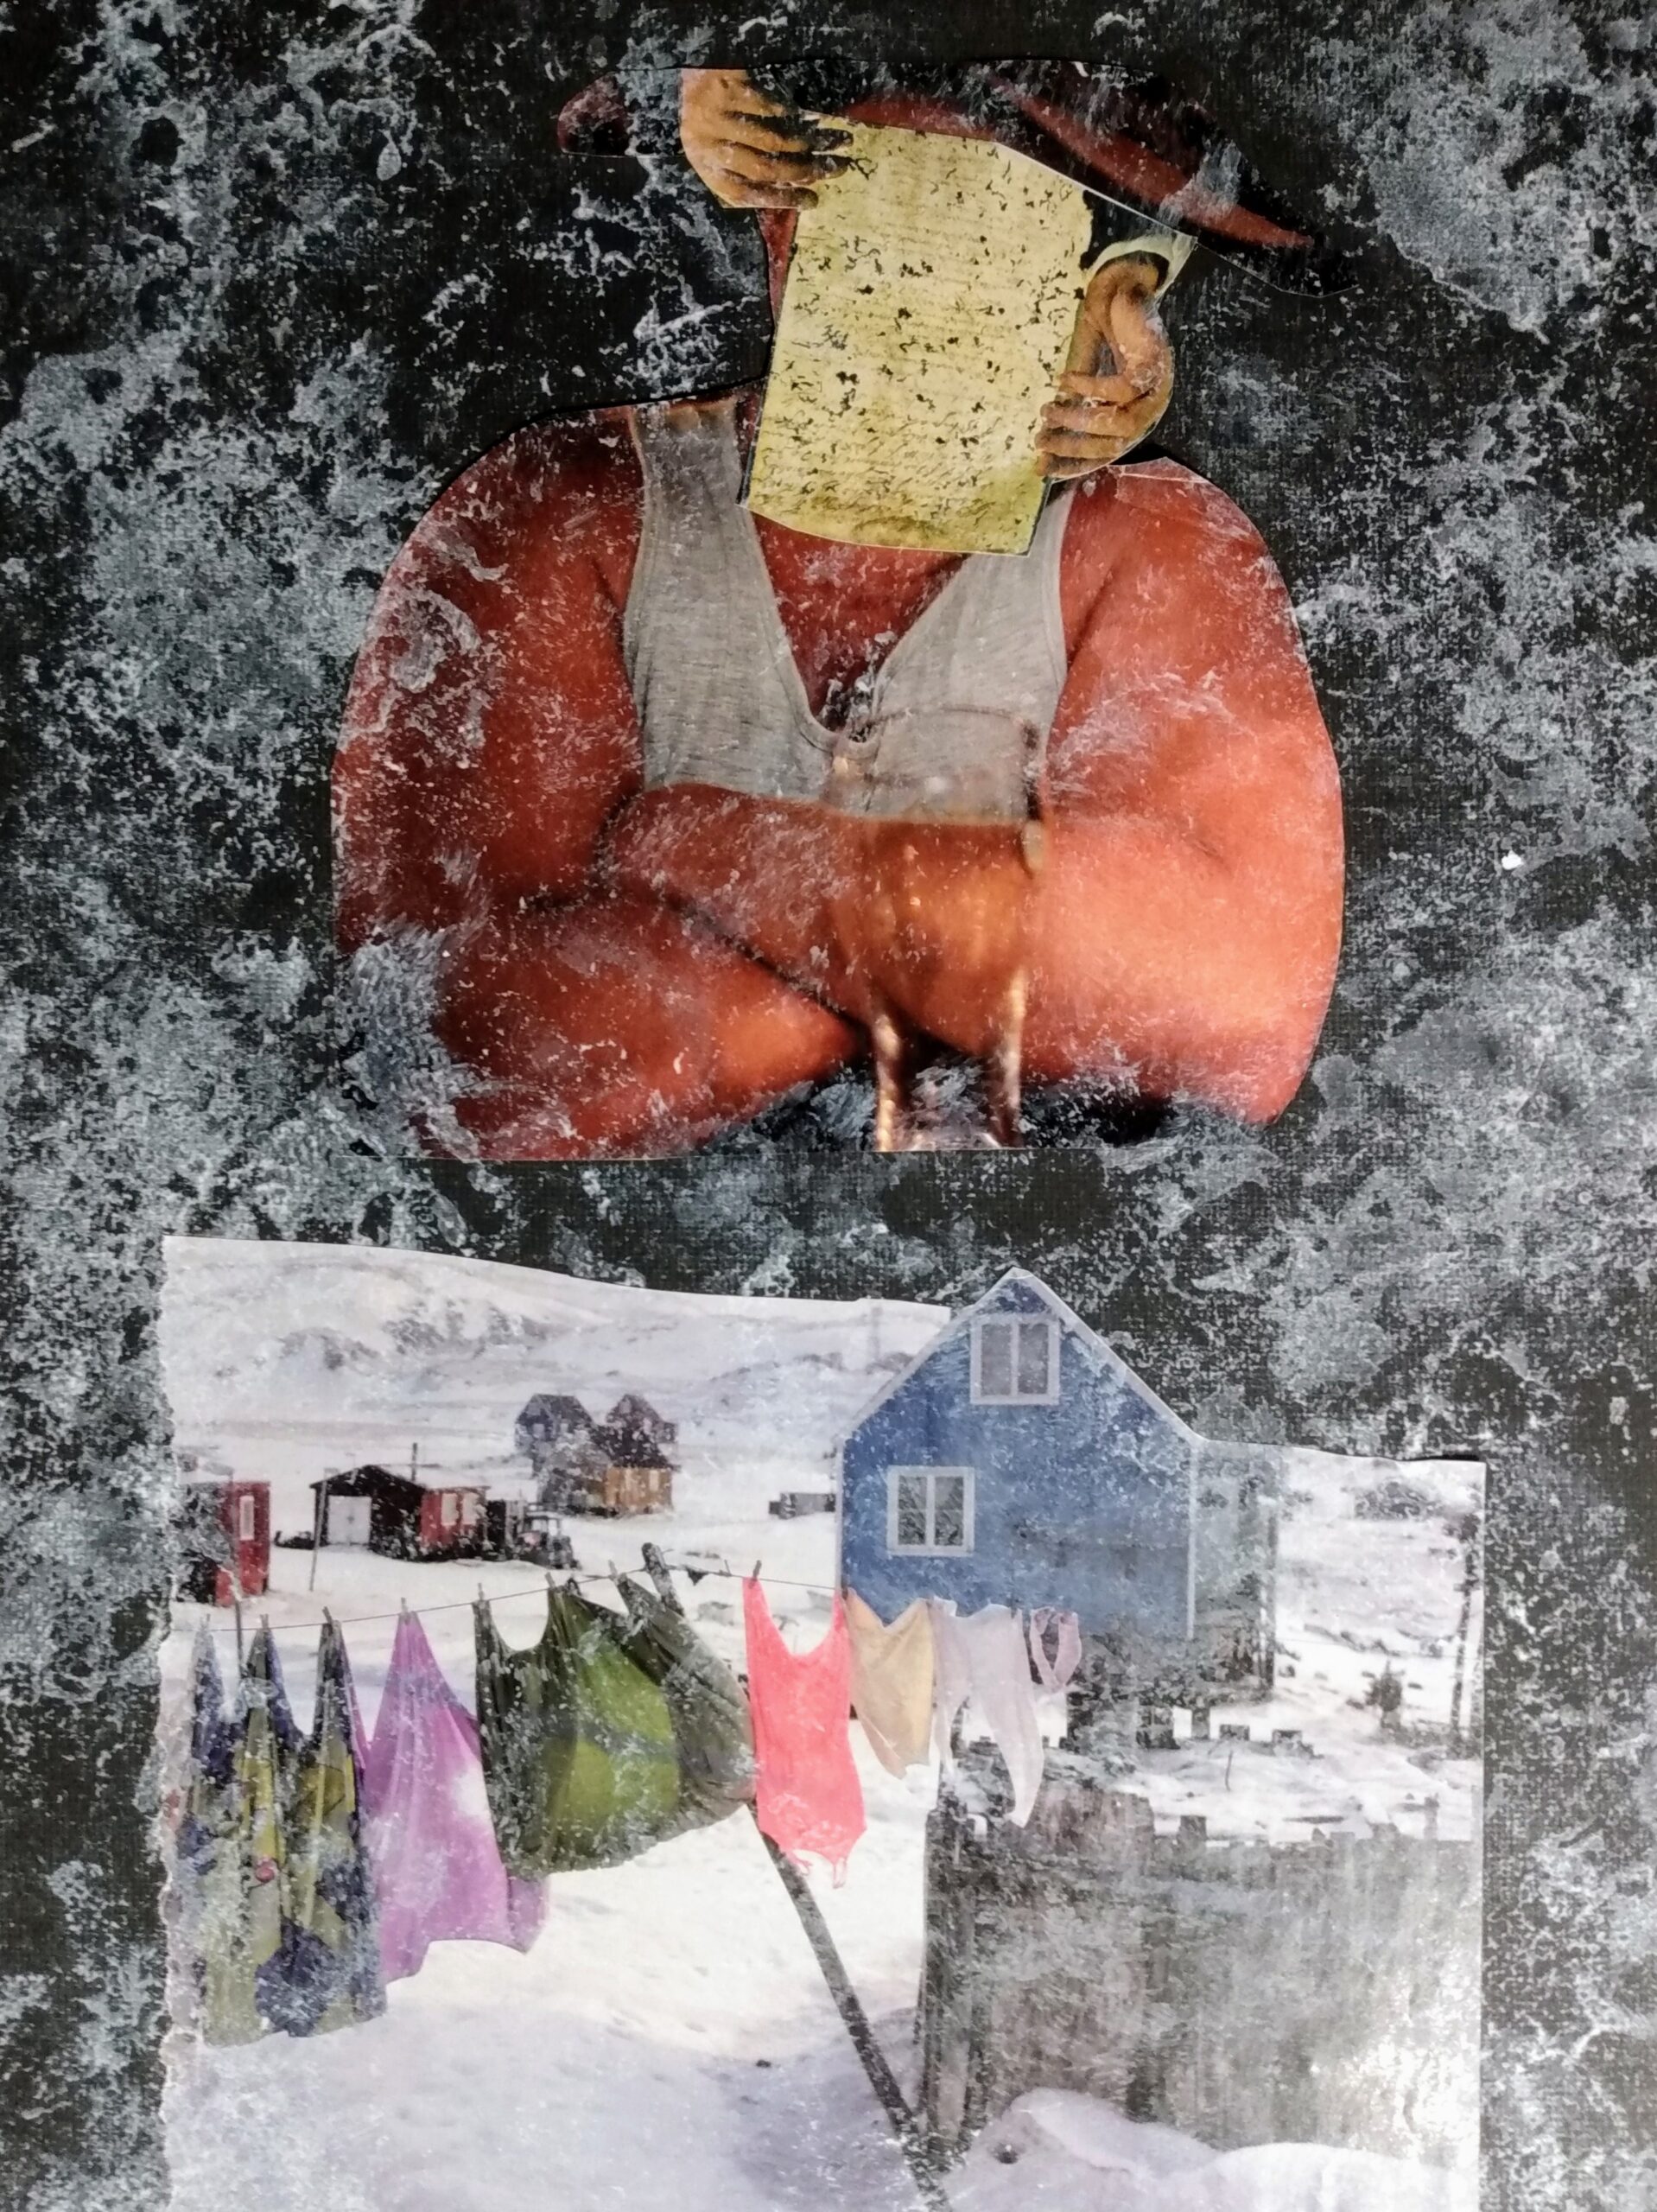 A digital collage of a person with a document on their head and bags on a clothing line on a snowy neighbourhood.